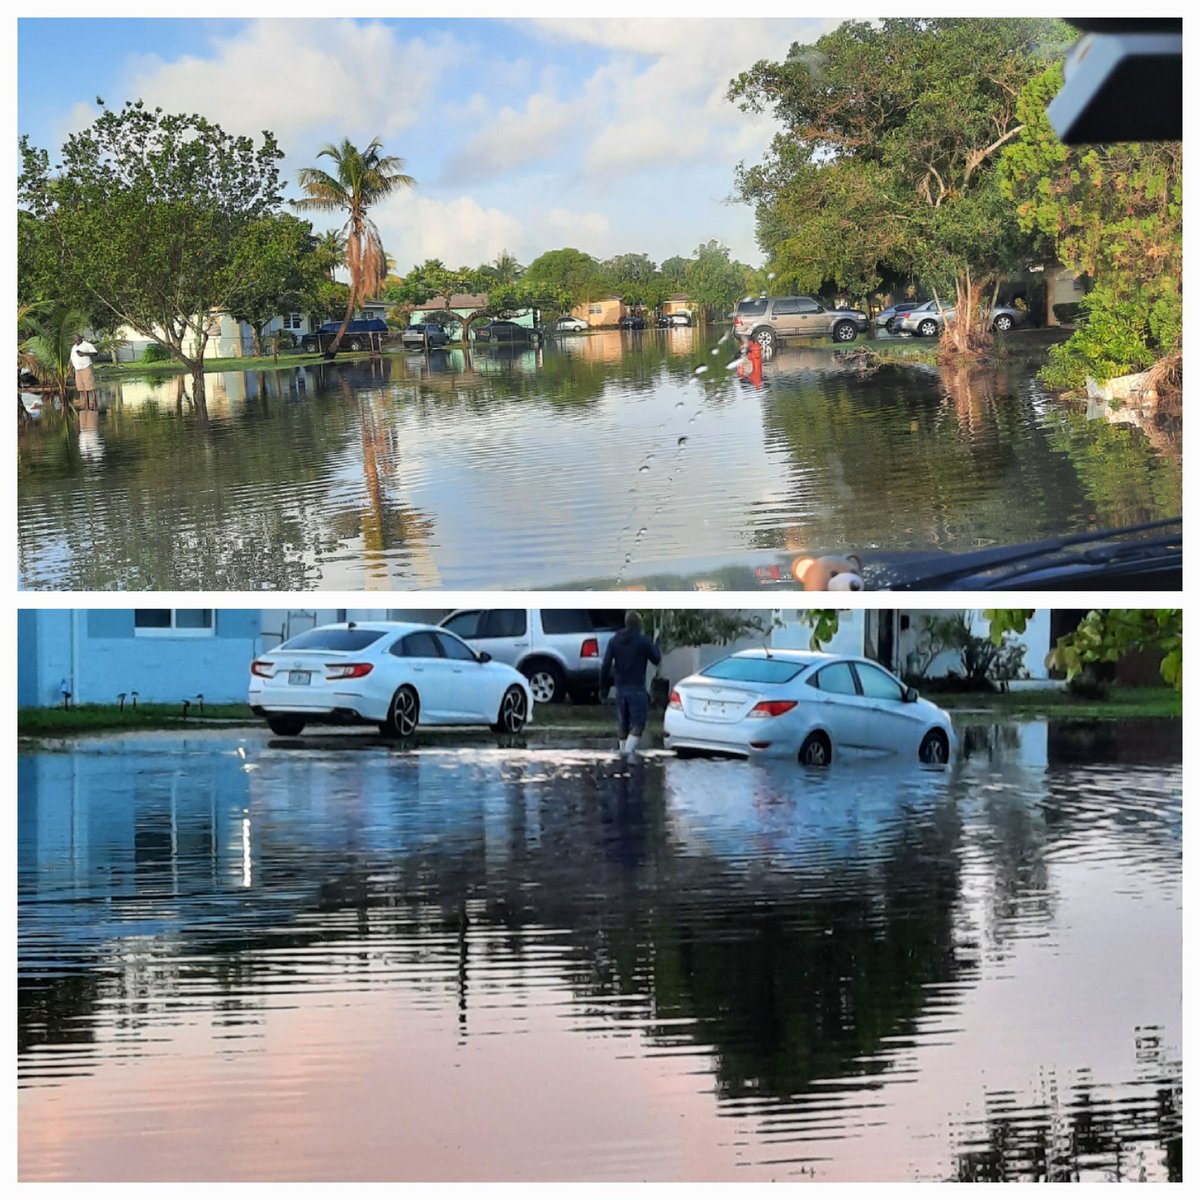 My street in Ft. Lauderdale in 2020 and my street in 2023 AFTER every drainage ditch was upgraded to prevent flooding. #MelrosePark